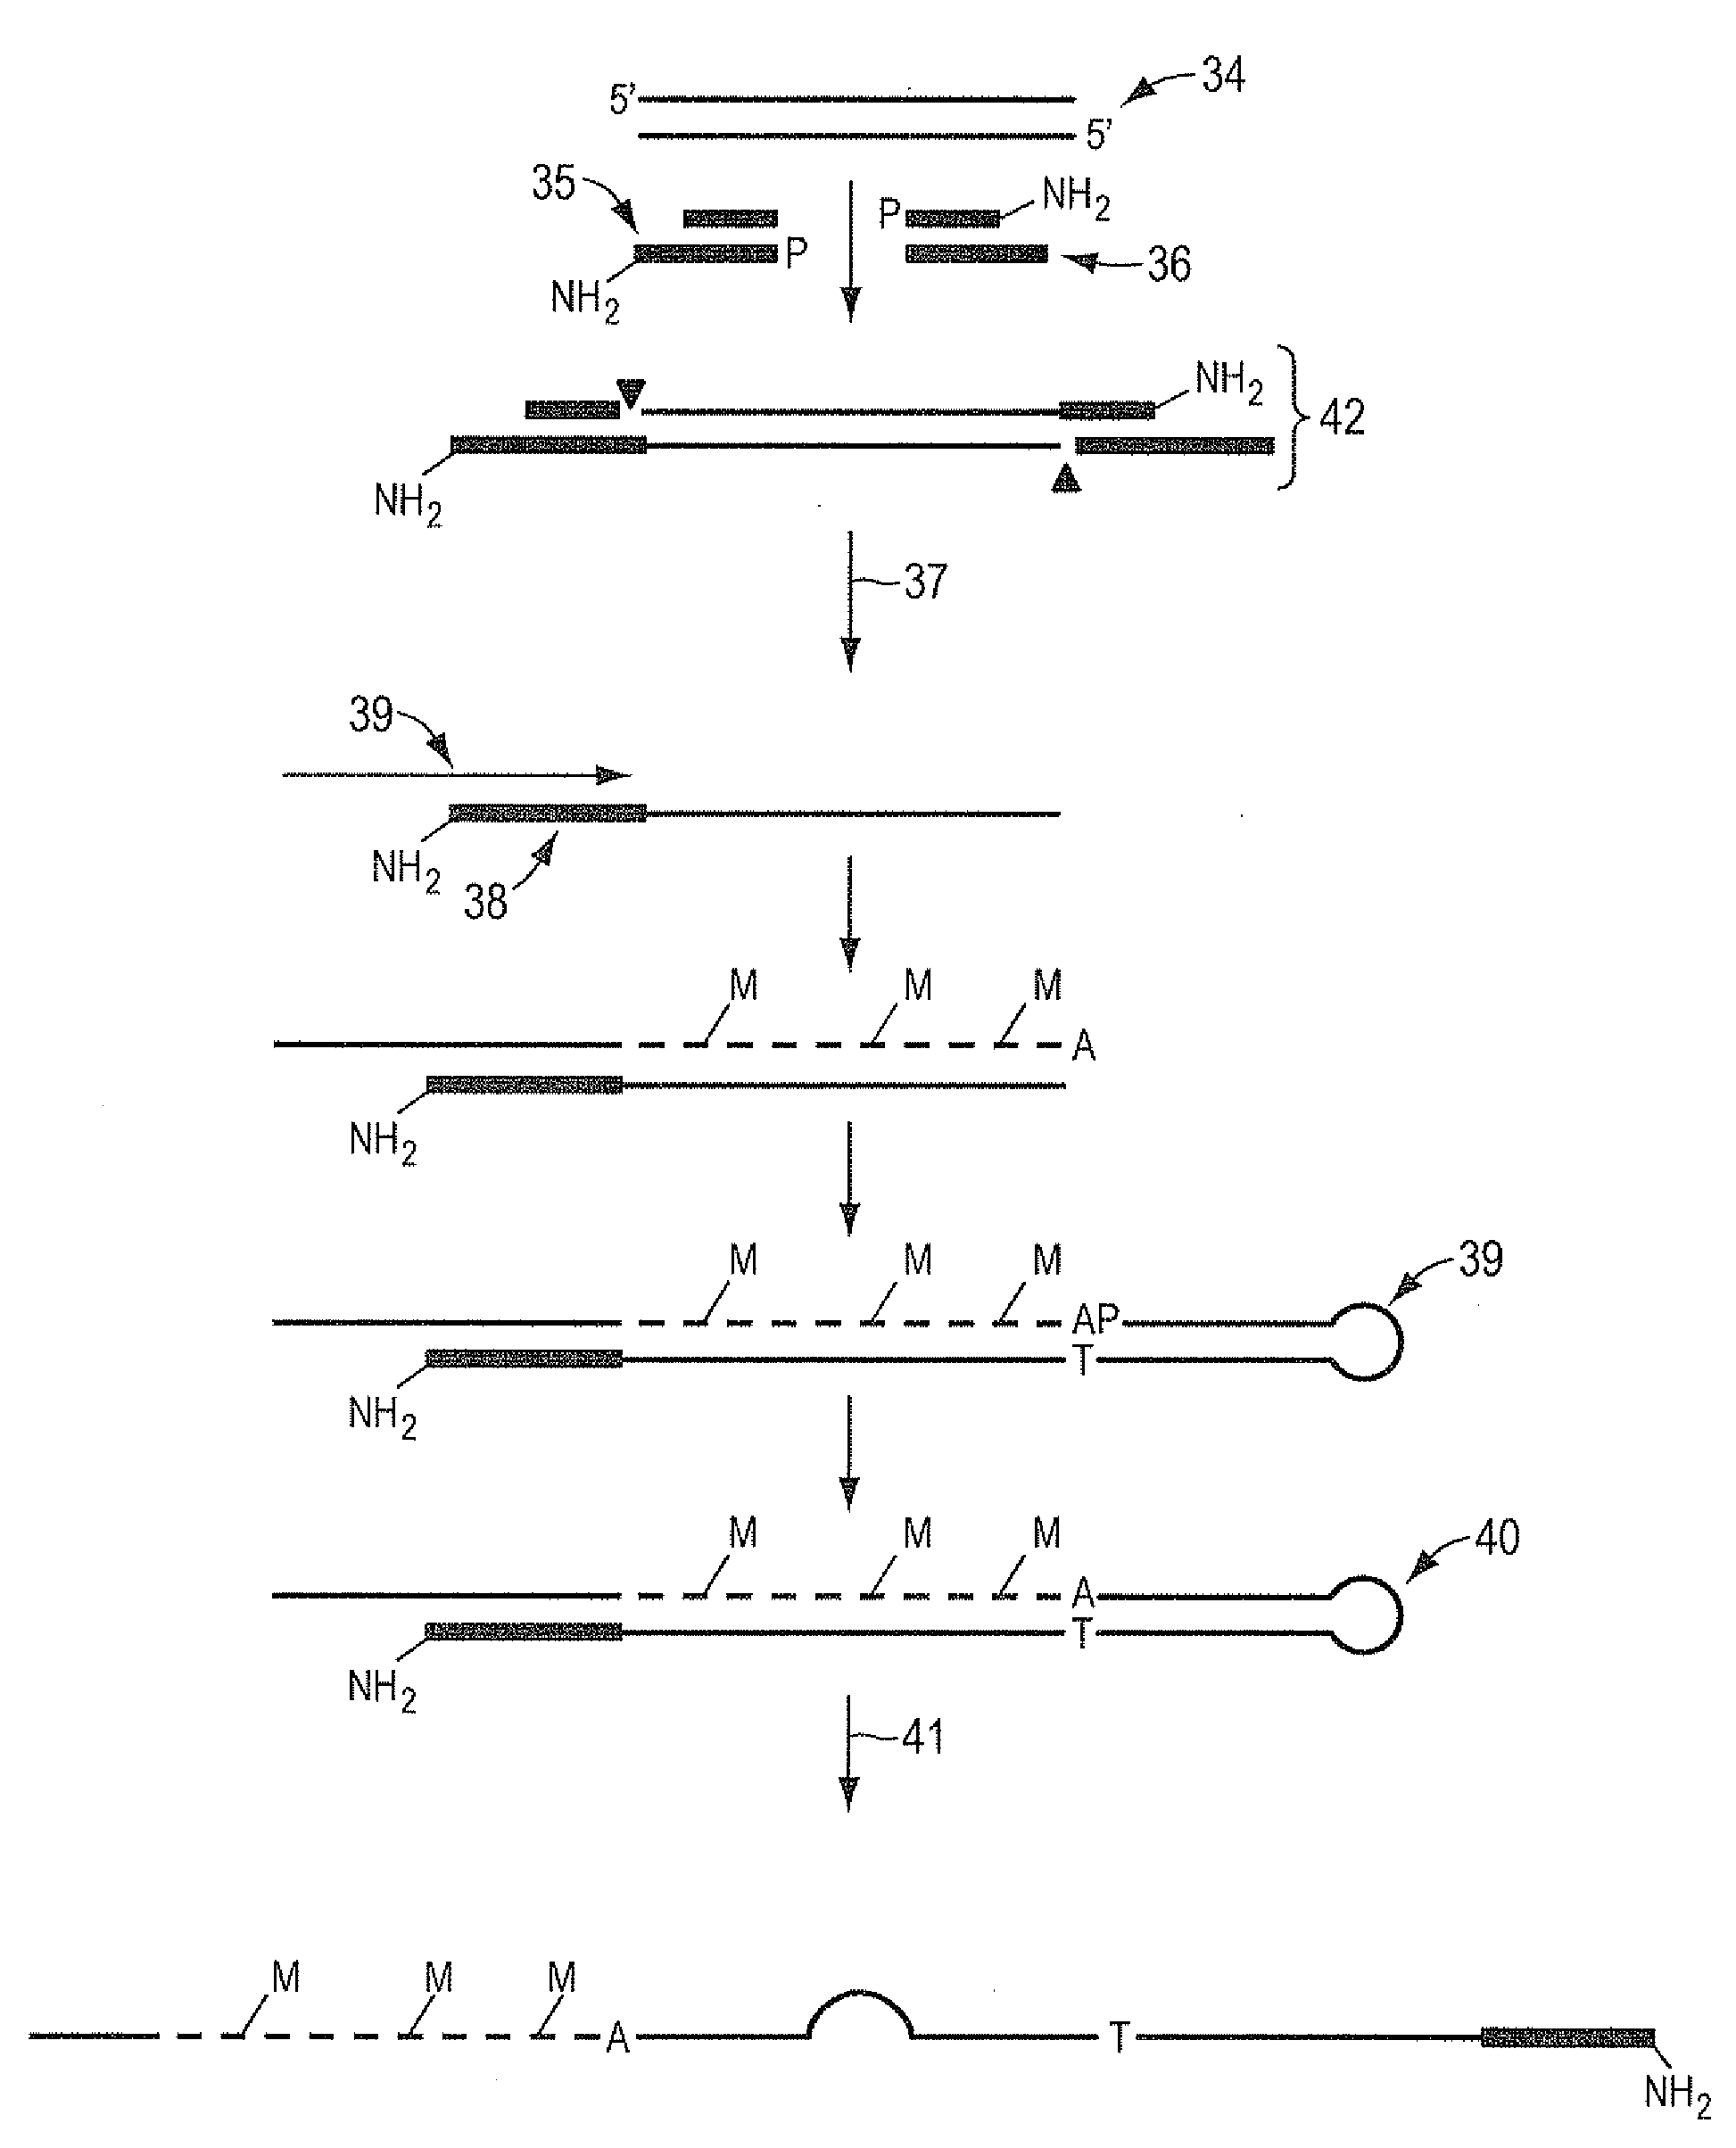 Method of sequencing and mapping target nucleic acids